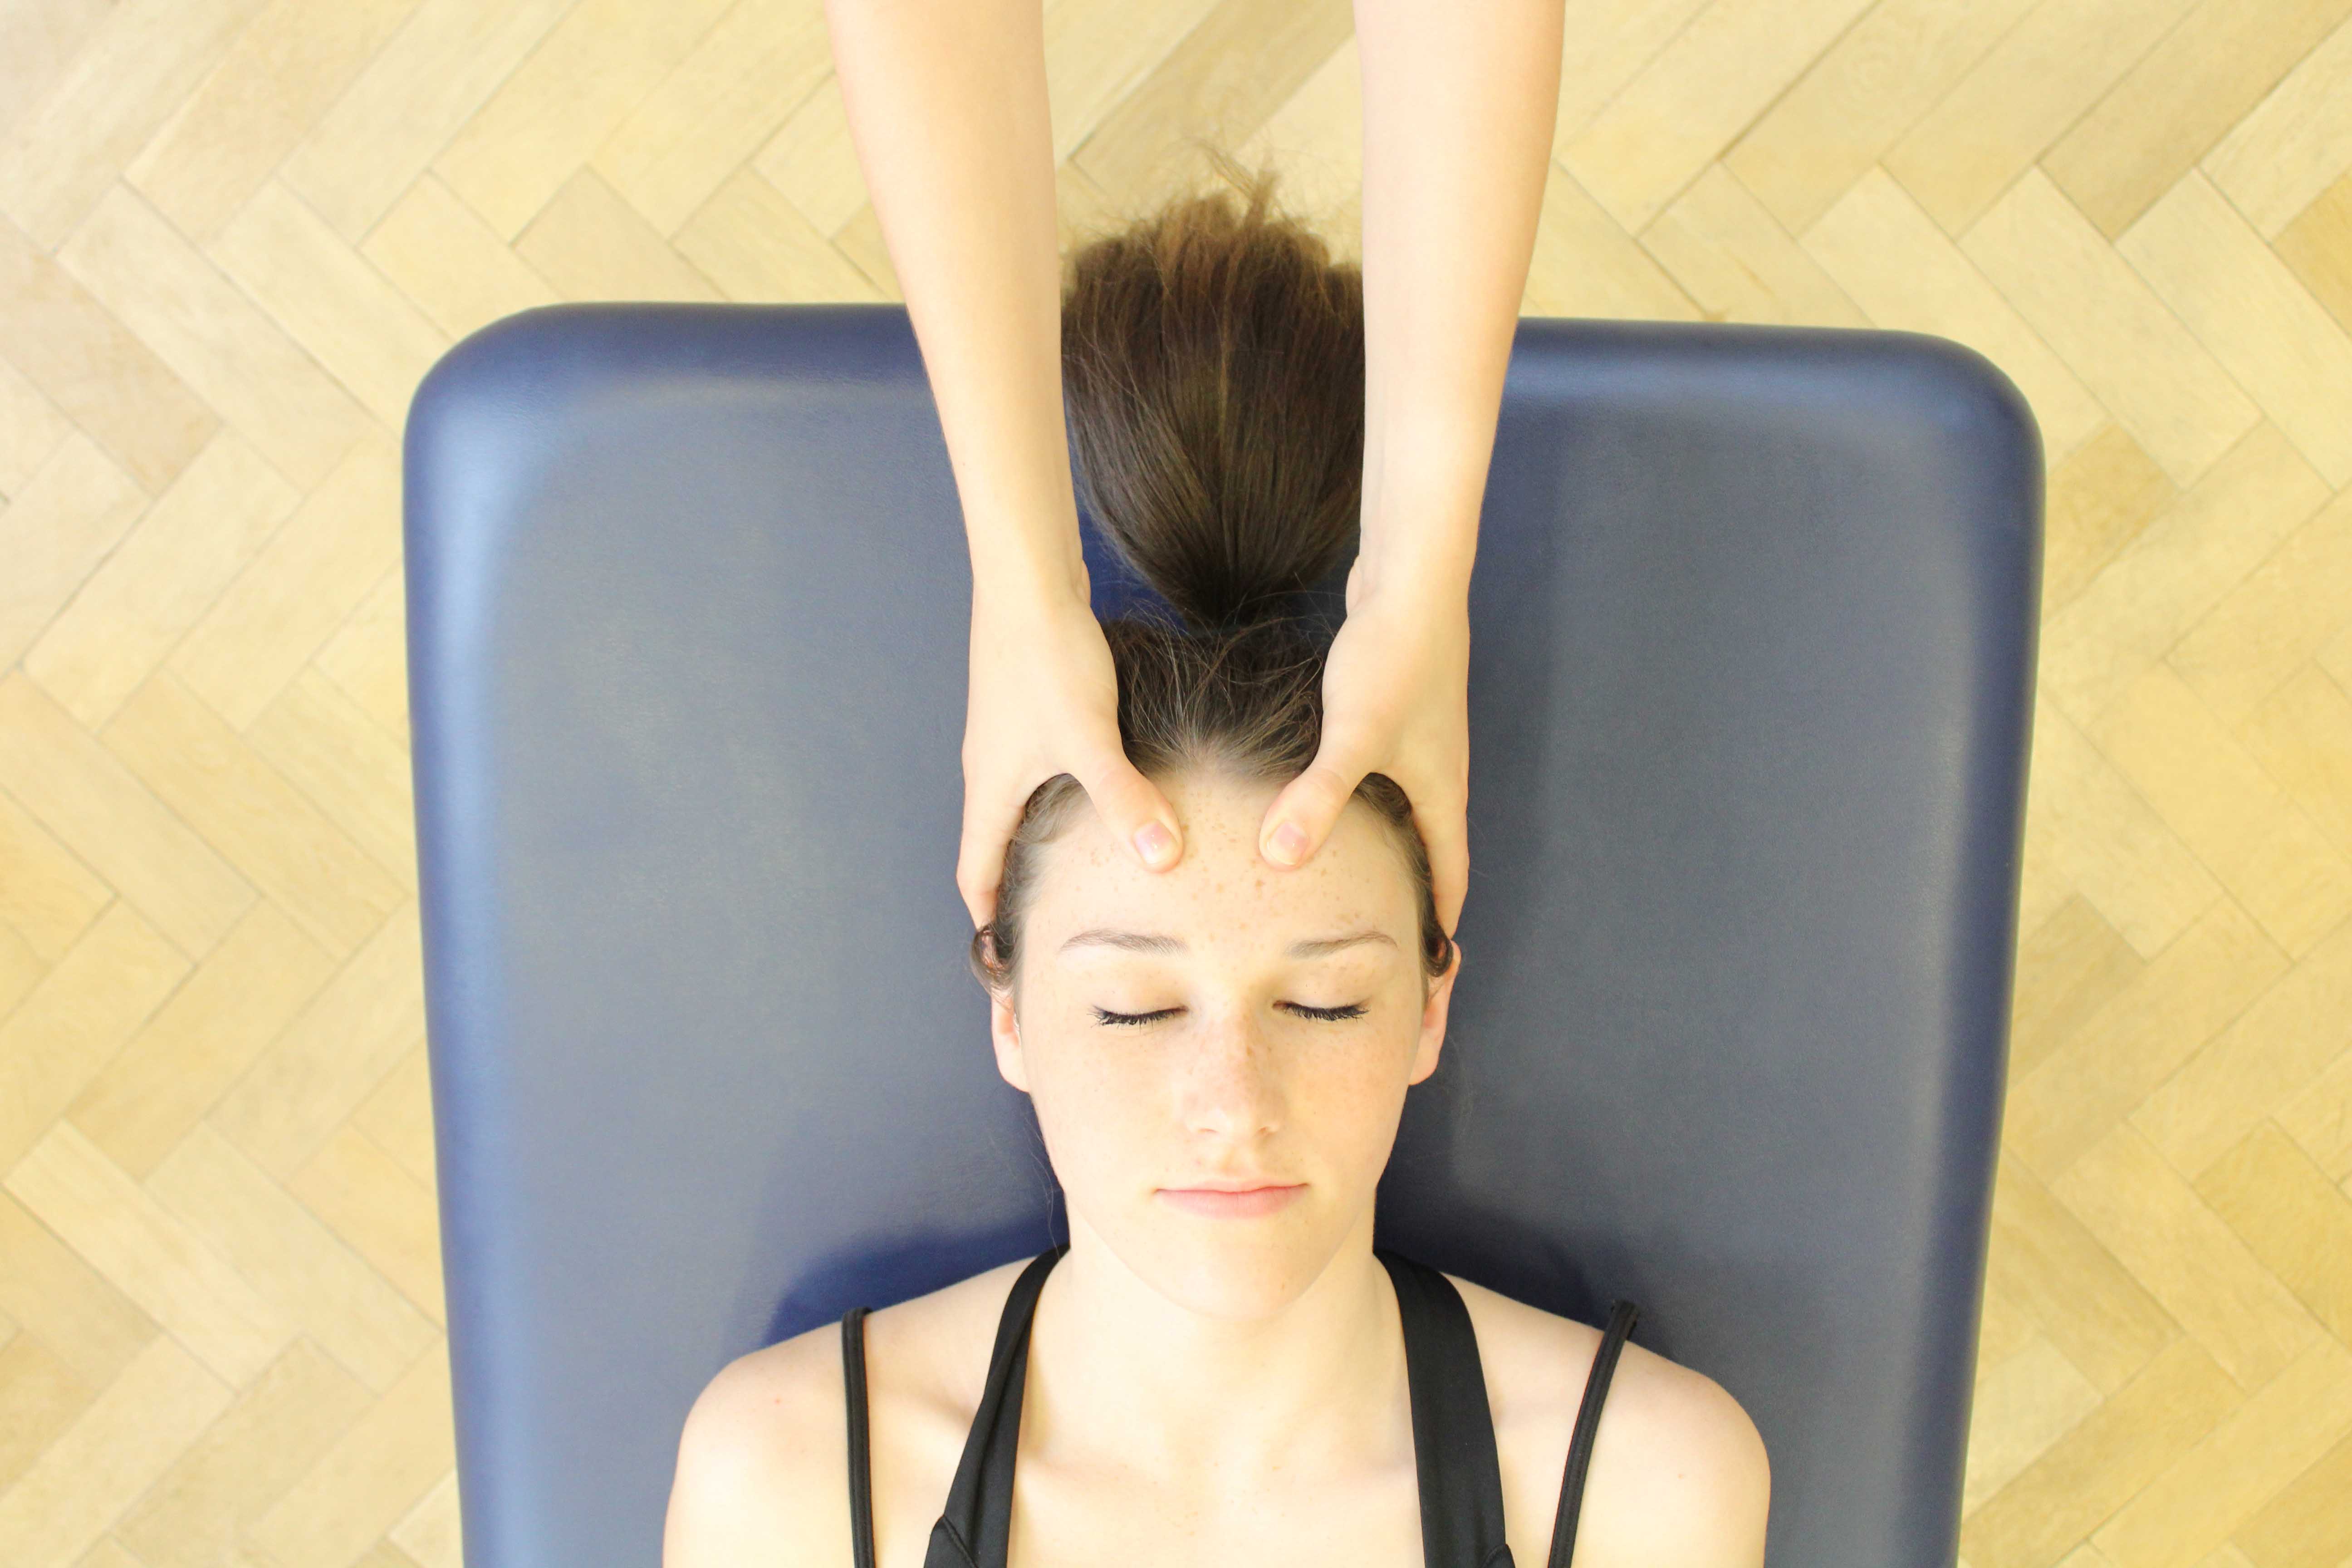 Soft tissue massage of the head, neck and shoulders to relieve tension, pressure and aching